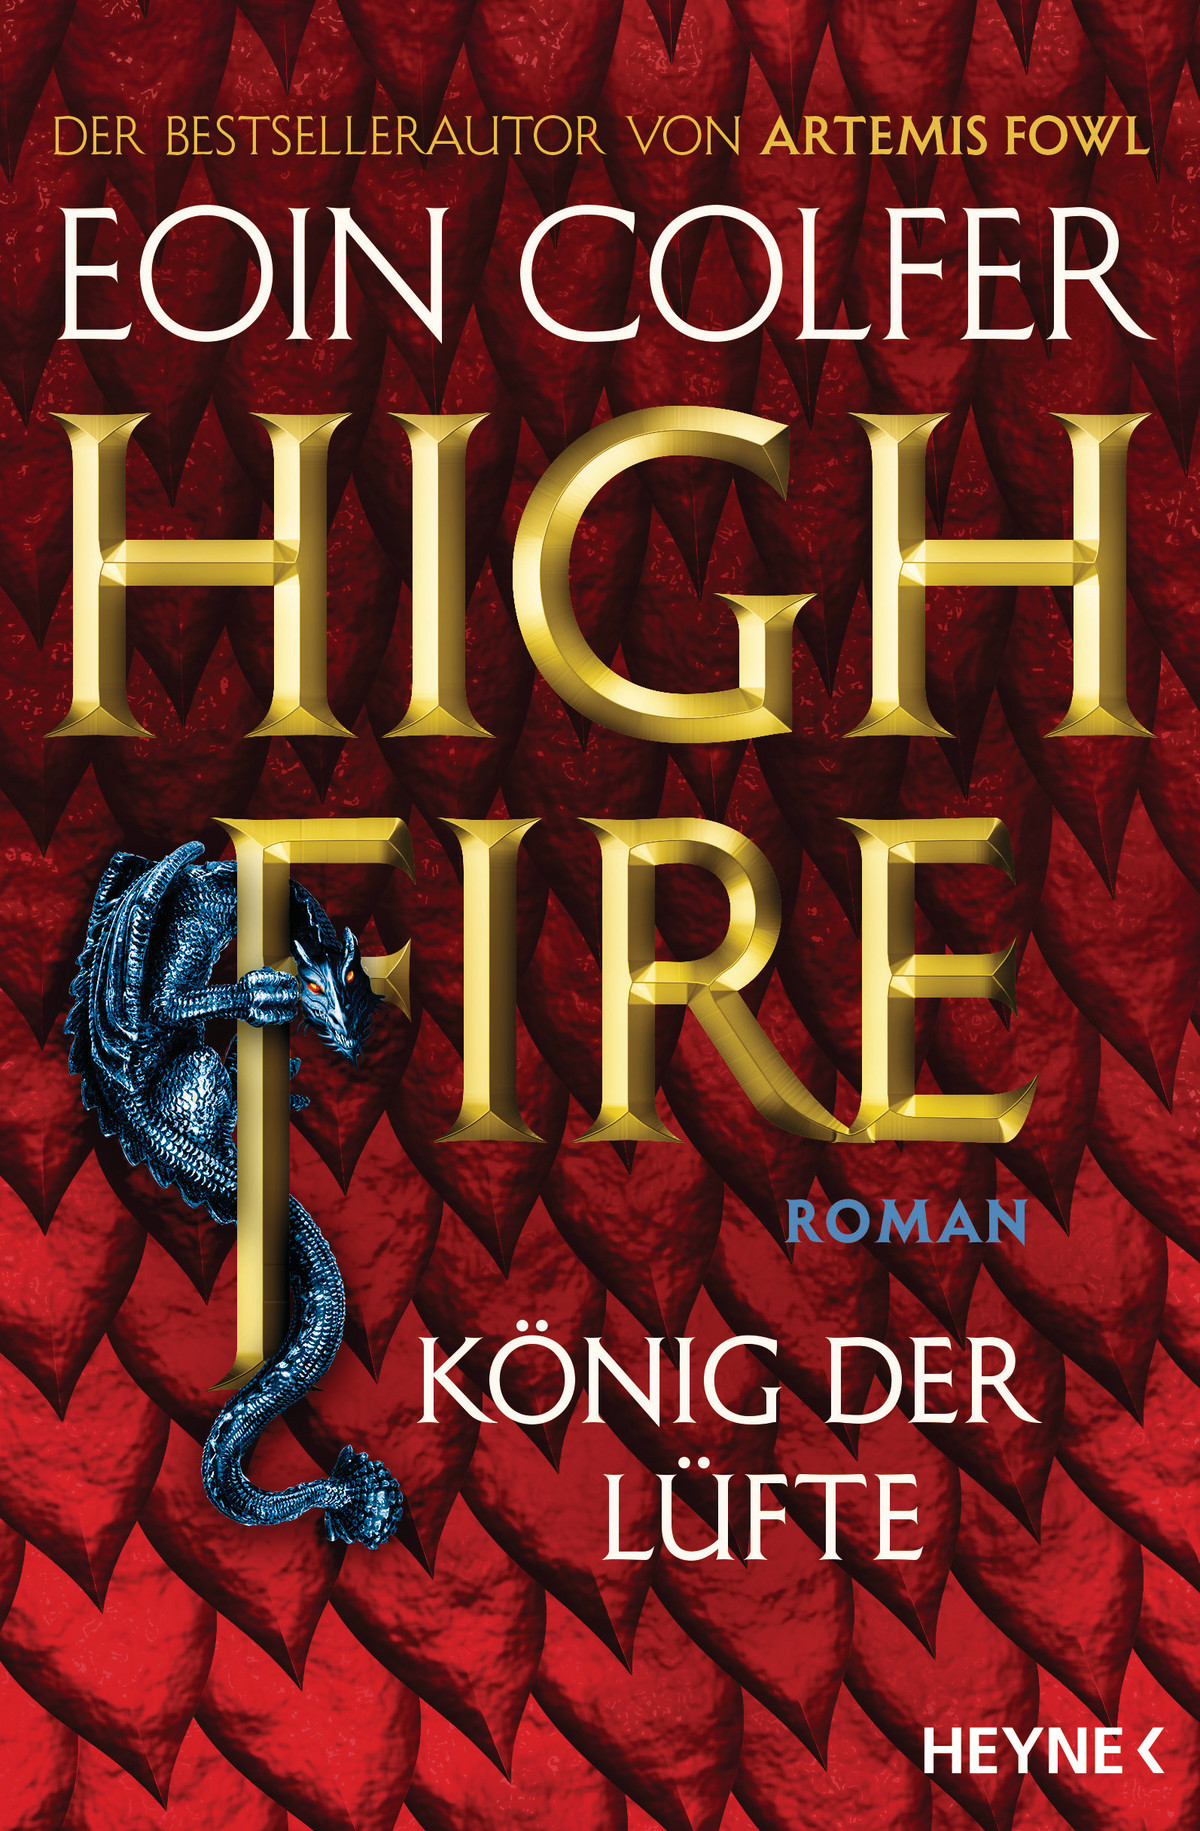 highfire by eoin colfer